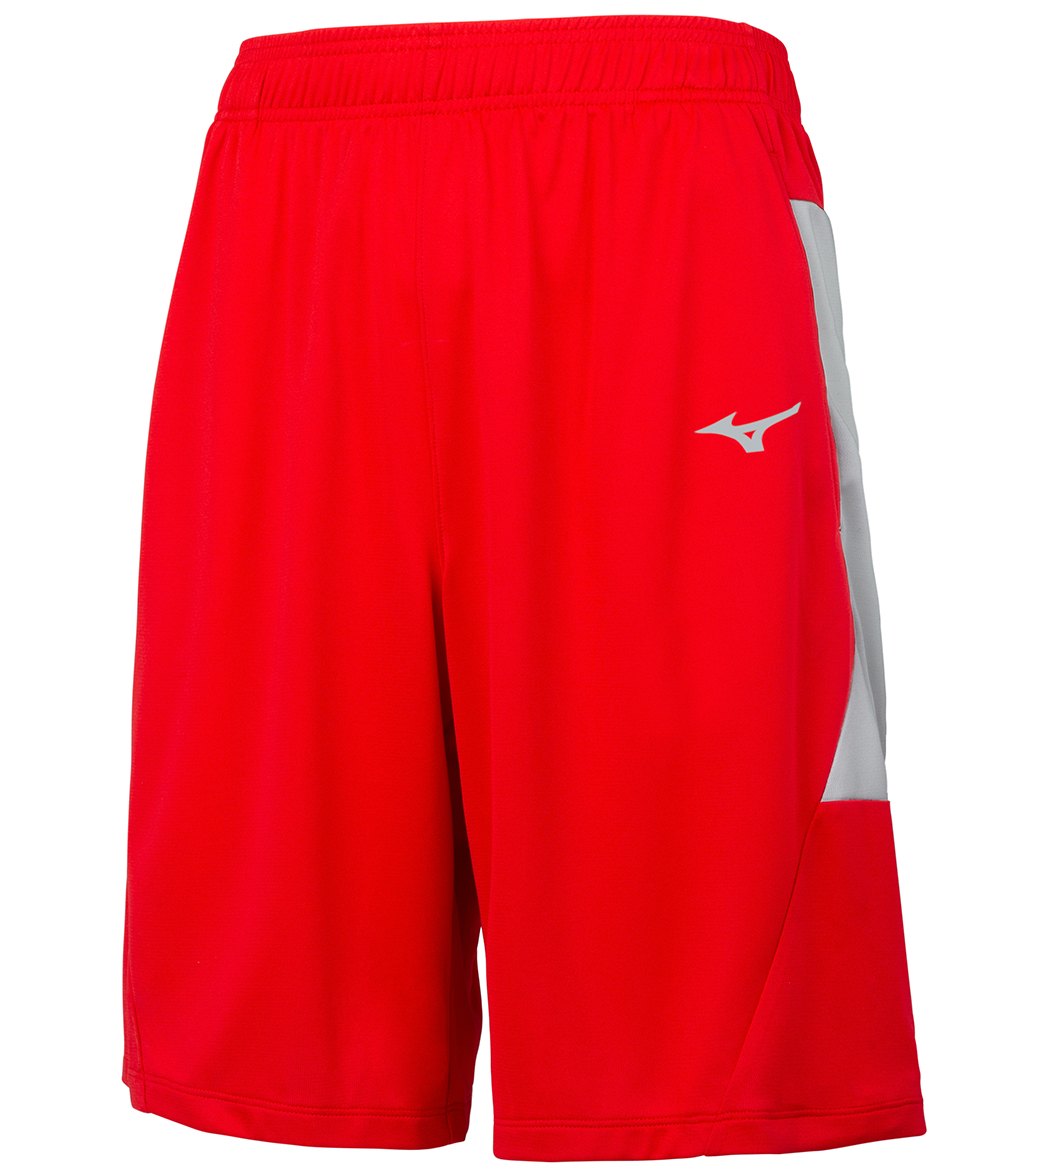 Mizuno Men's Aerolite Short - Red-Charcoal-Shadow Large Red/Charcoal/Shadow - Swimoutlet.com